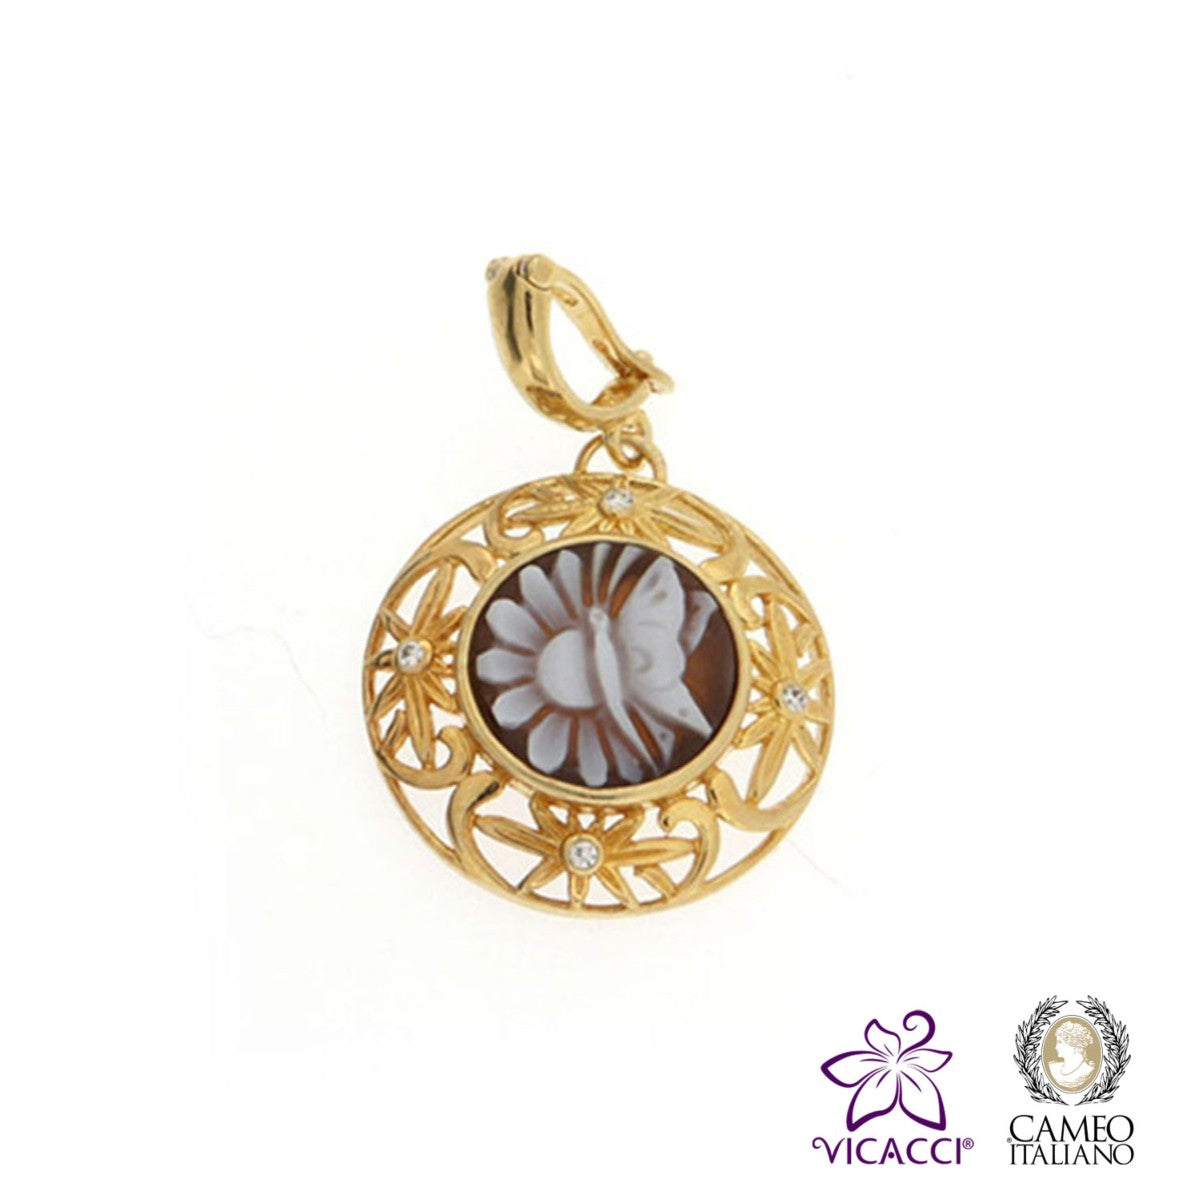 Cameo Italiano, P36 Pendant , Gold Plated Sterling Silver